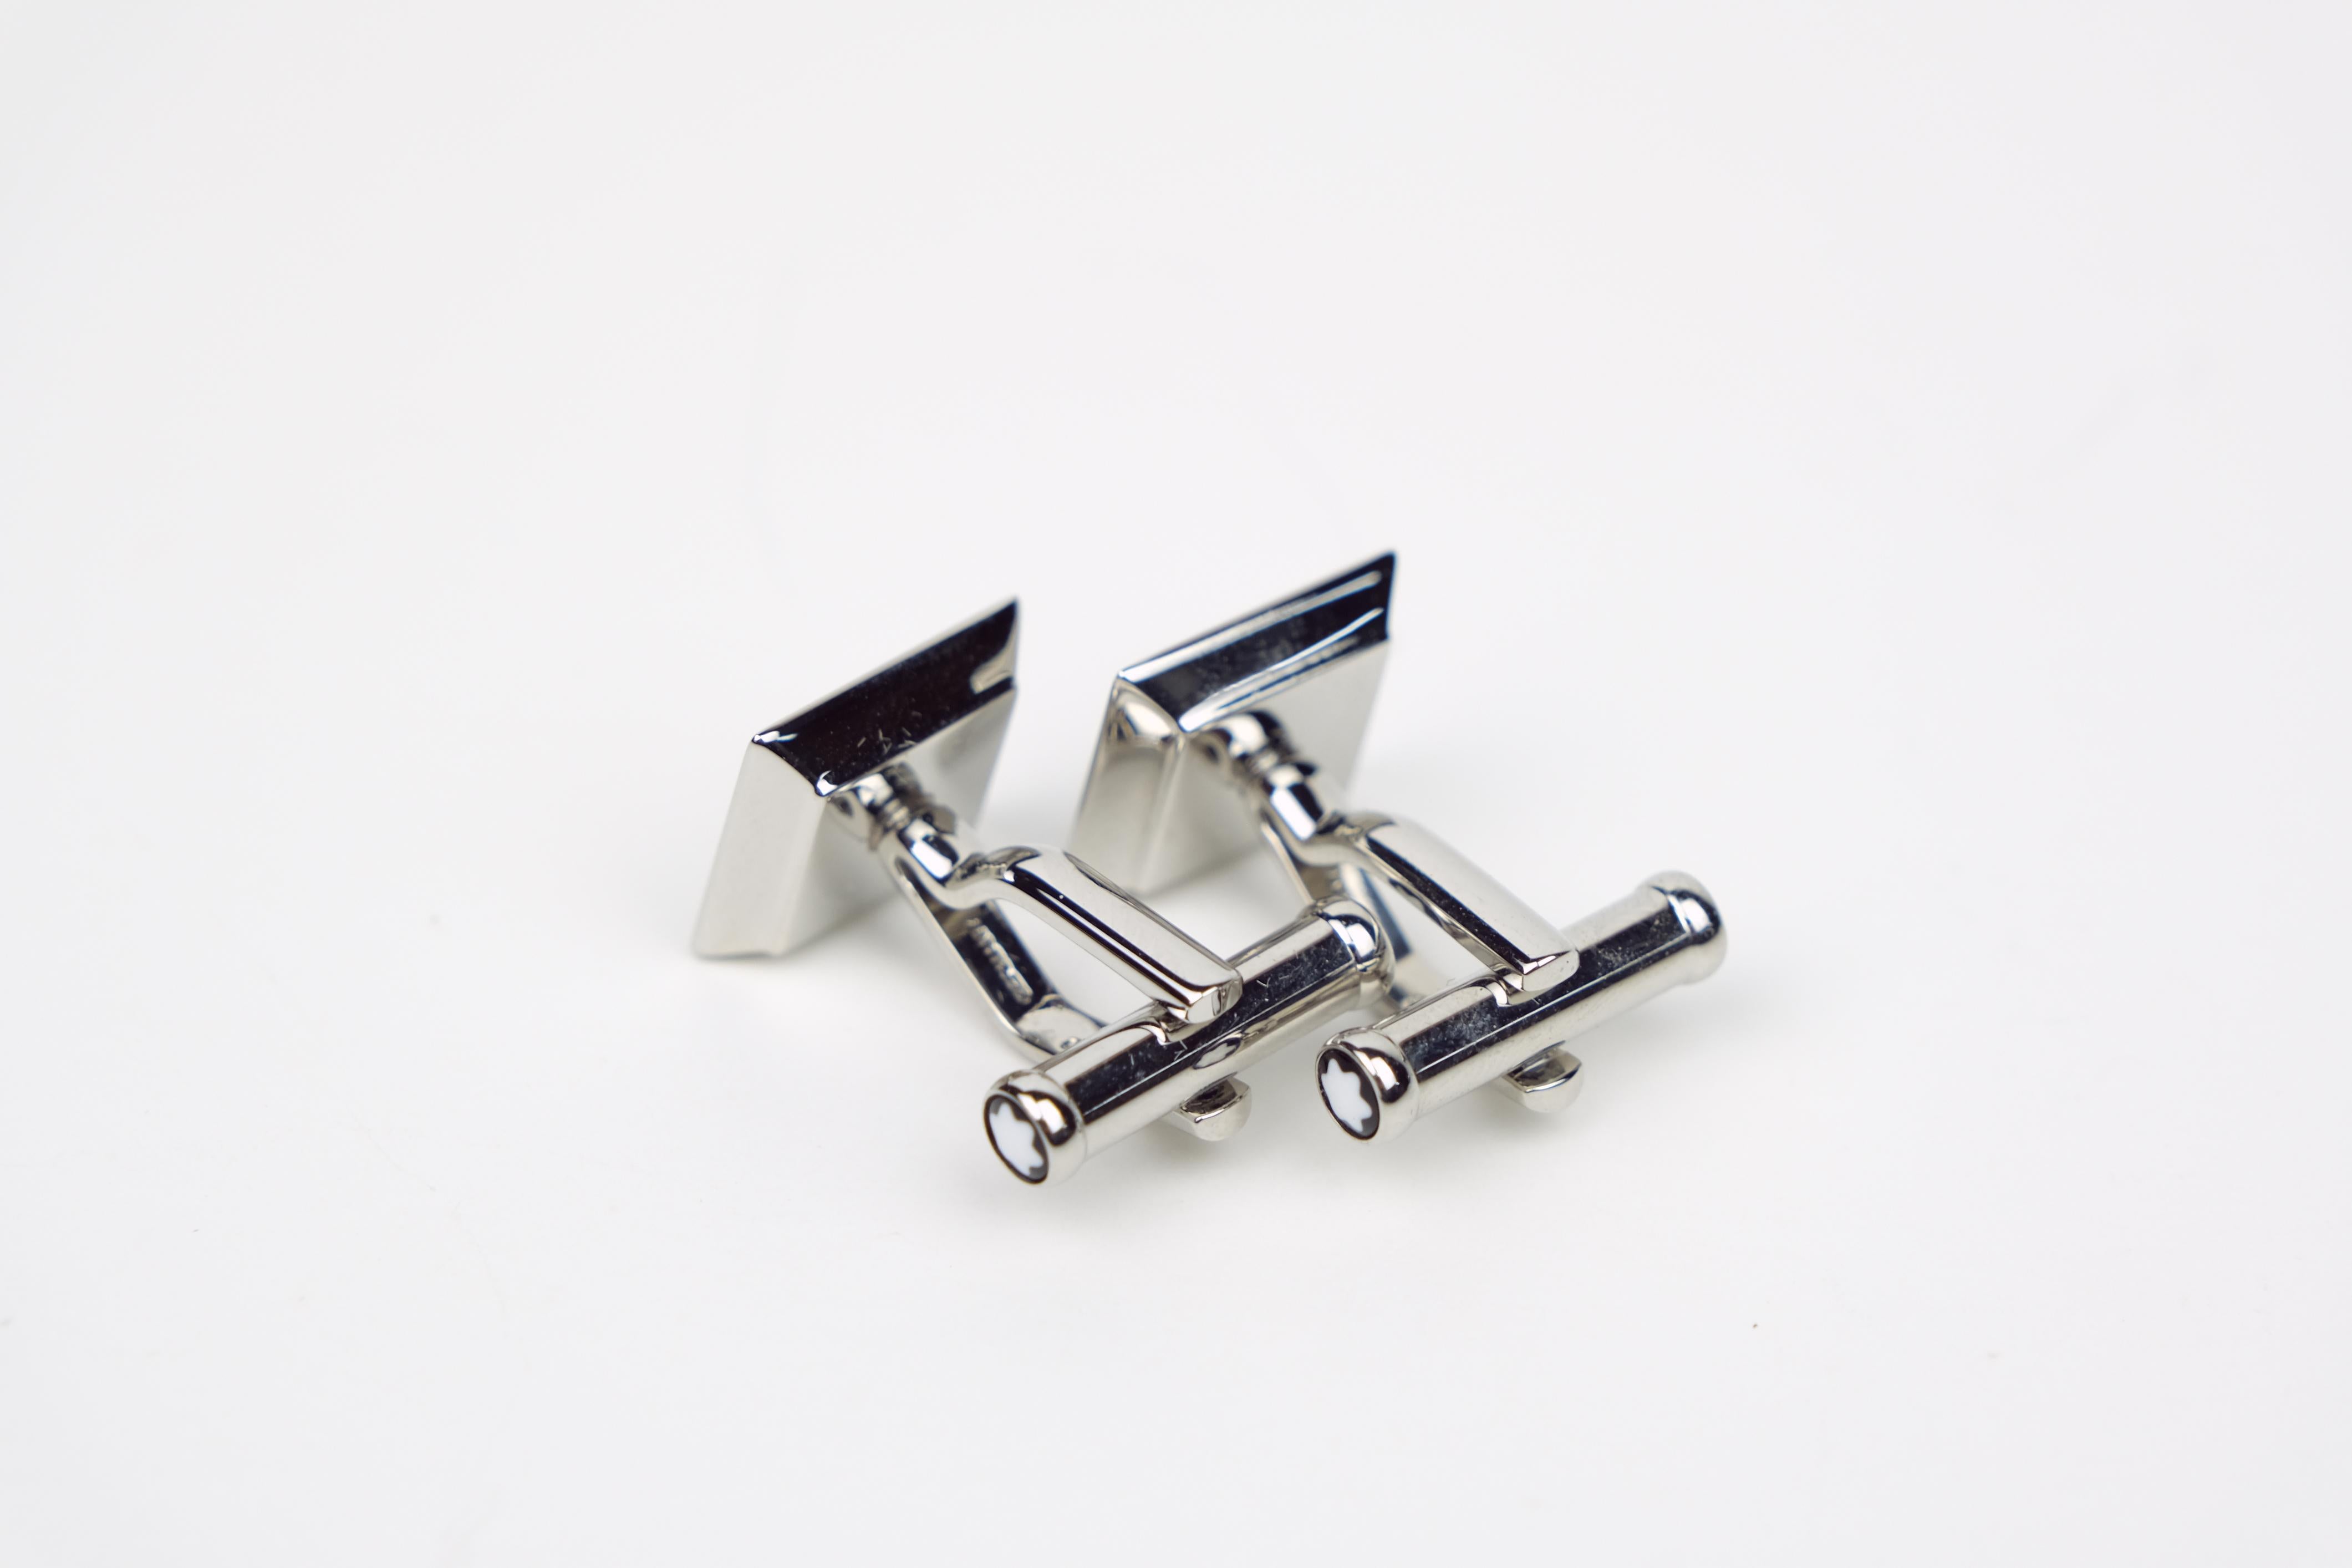 Montblanc Iconic Square Shaped Mystery Motif Stainless Steel Cuff Links 111316

Comes with origianl box
Brand Name: Montblanc
Series: Iconic Cuff Links
Materials: Made of stainless steel
Shape: Square
Dimension: 14MM